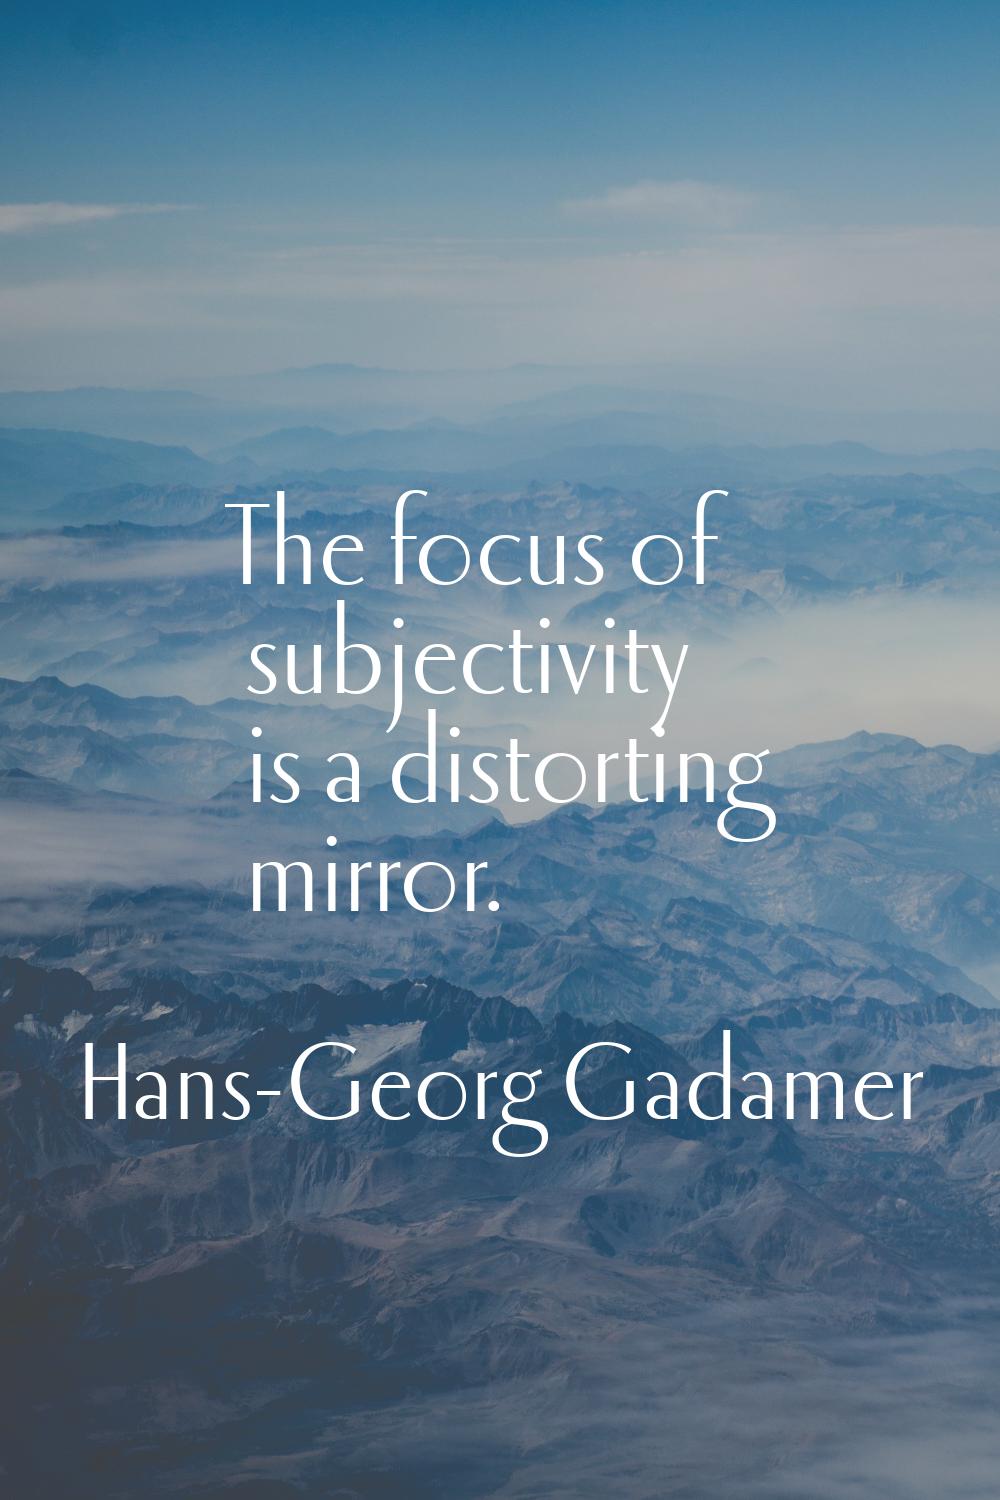 The focus of subjectivity is a distorting mirror.